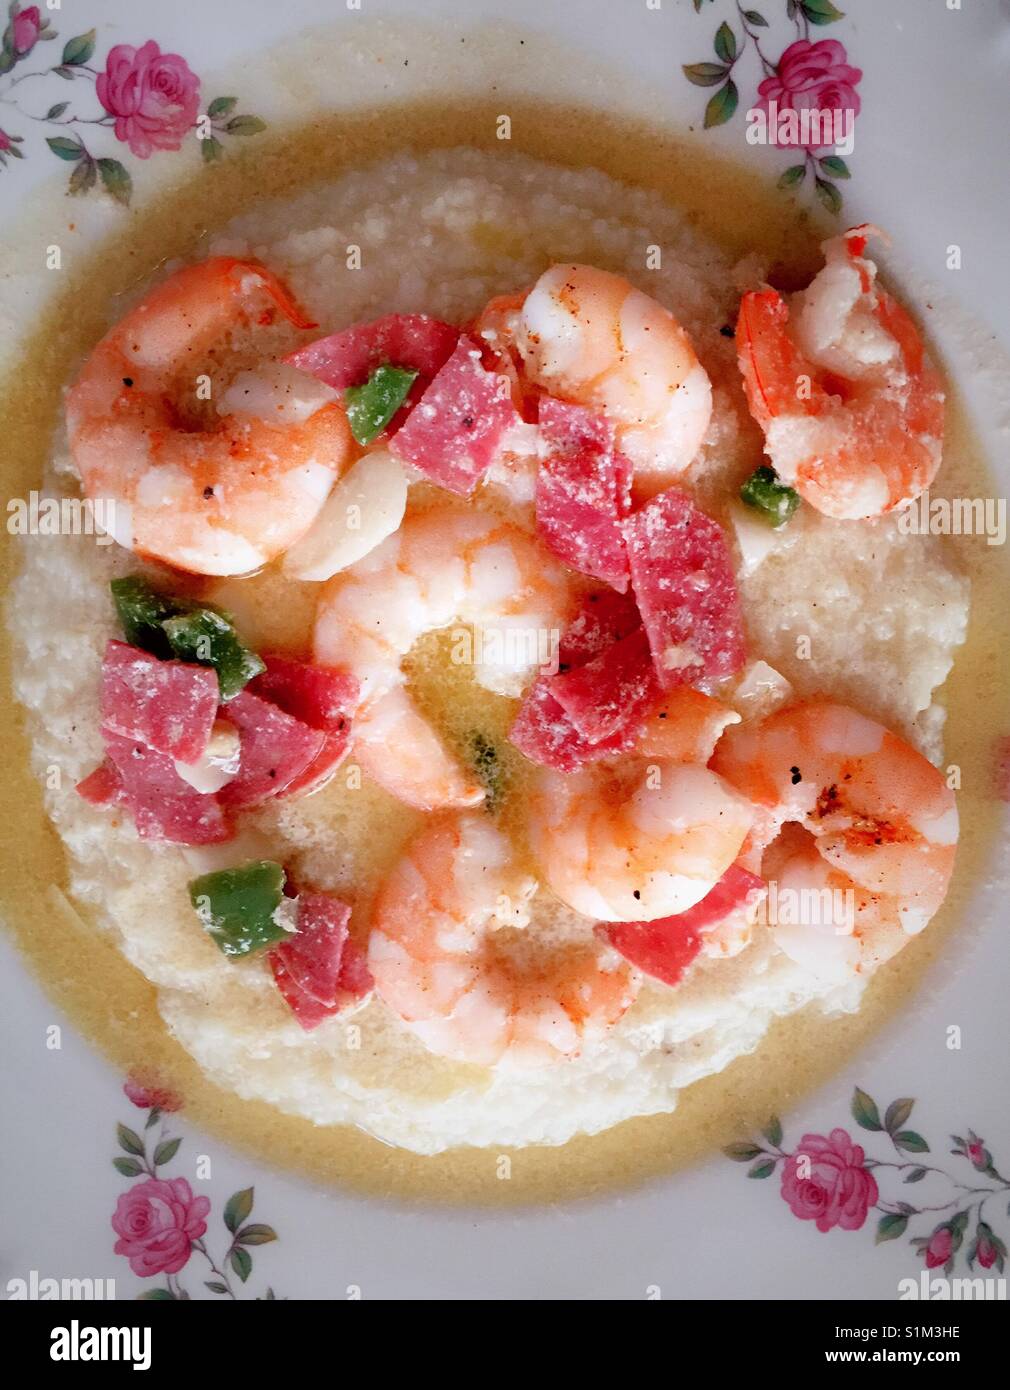 Shrimp and grits served on a China plate, USA Stock Photo